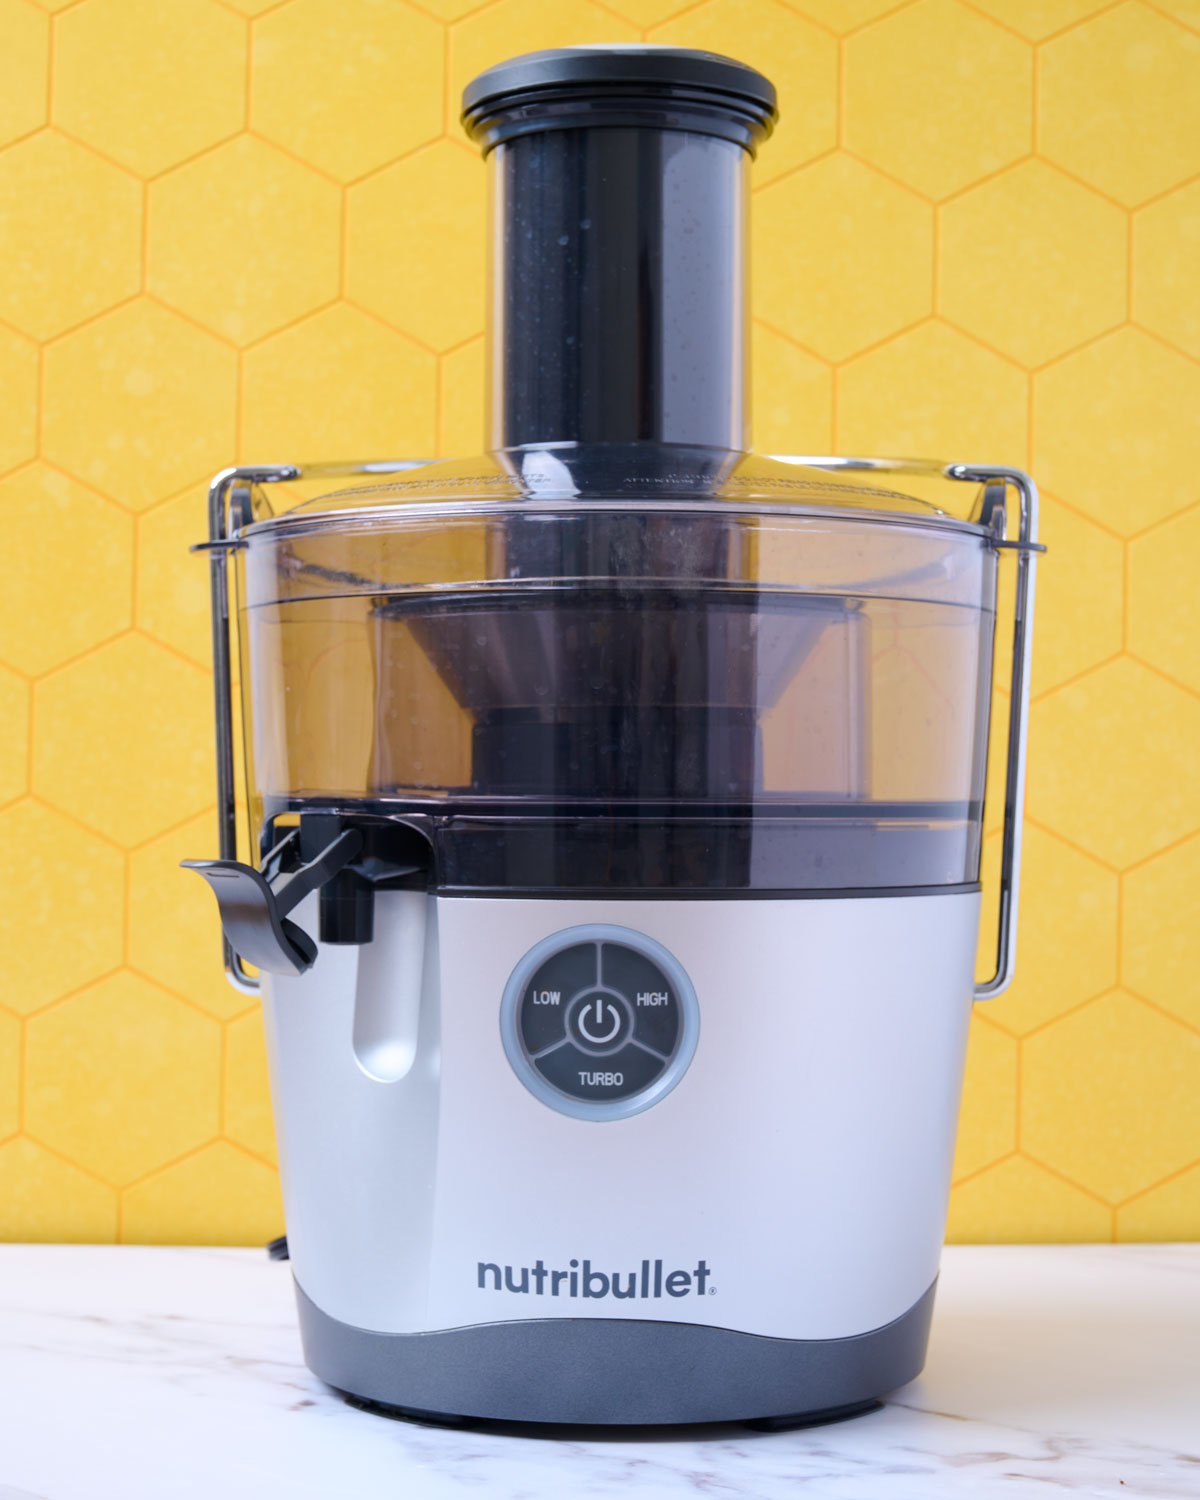 A Nutribullet juicer on a marble counter.